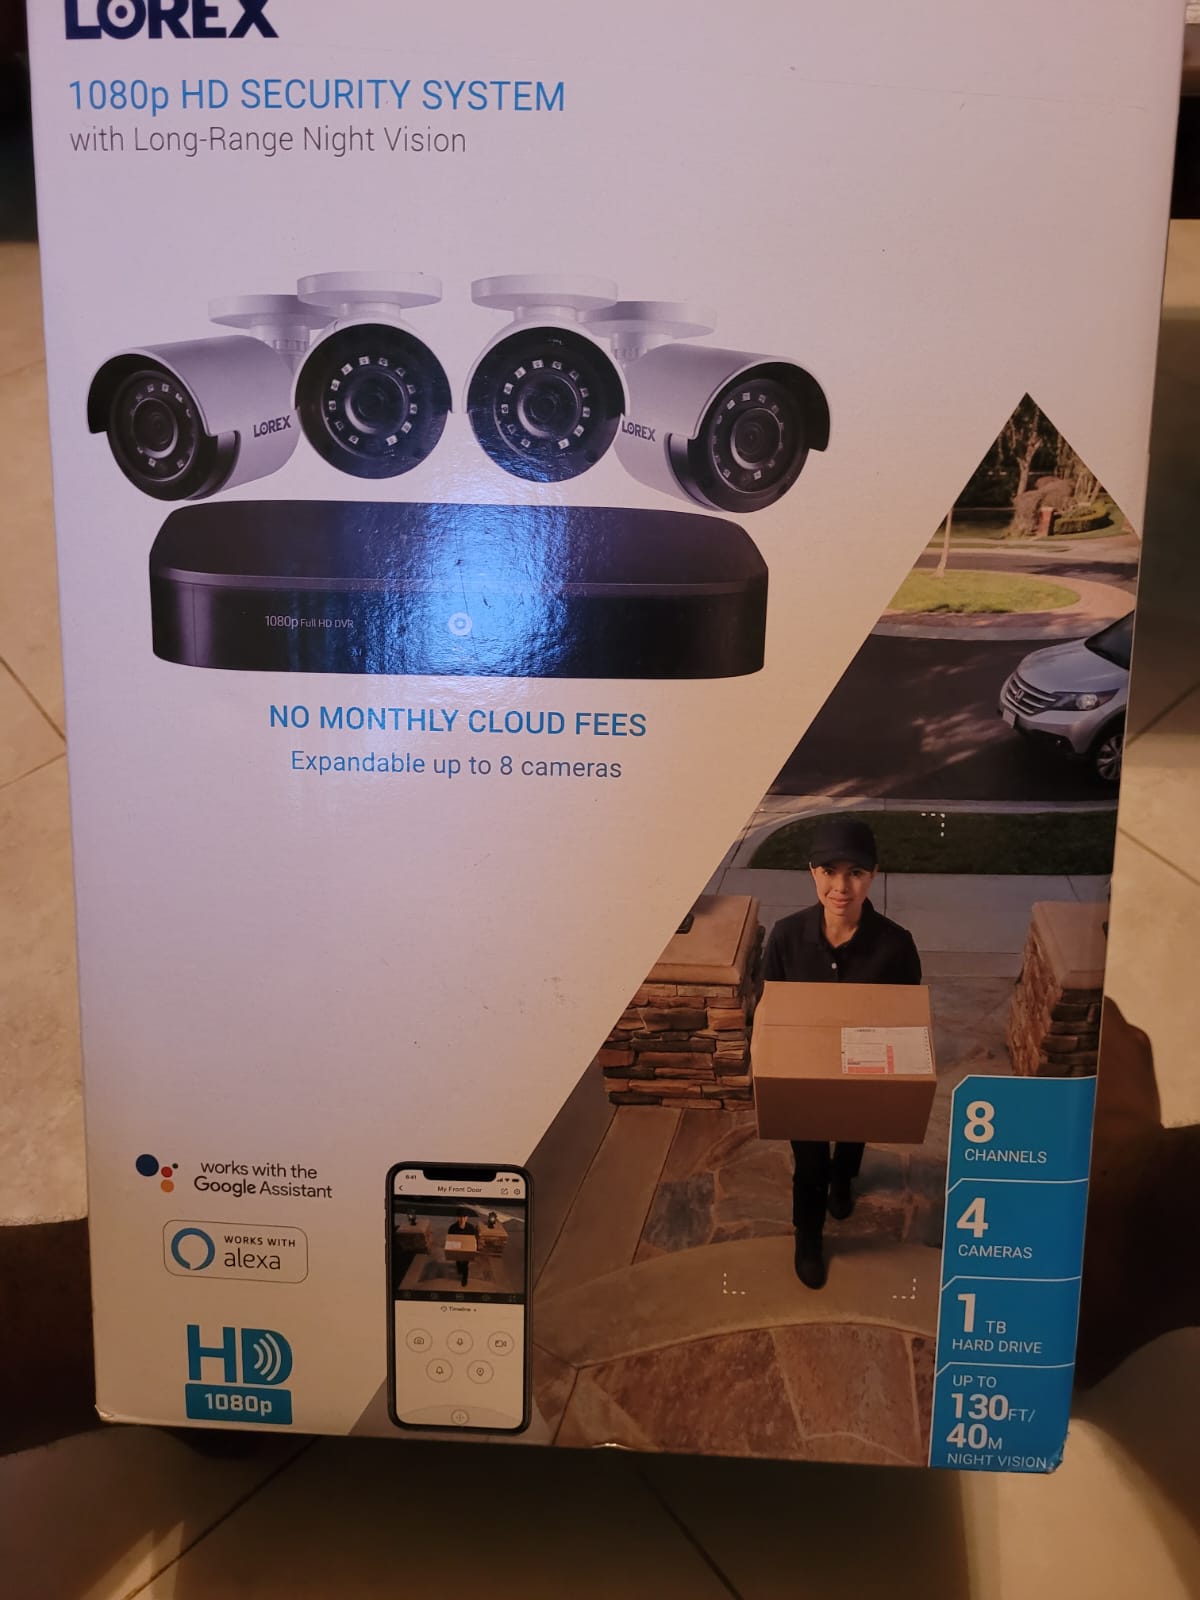 D241 SERIES LOREX HOME SECURITY DVR NOT WORKING